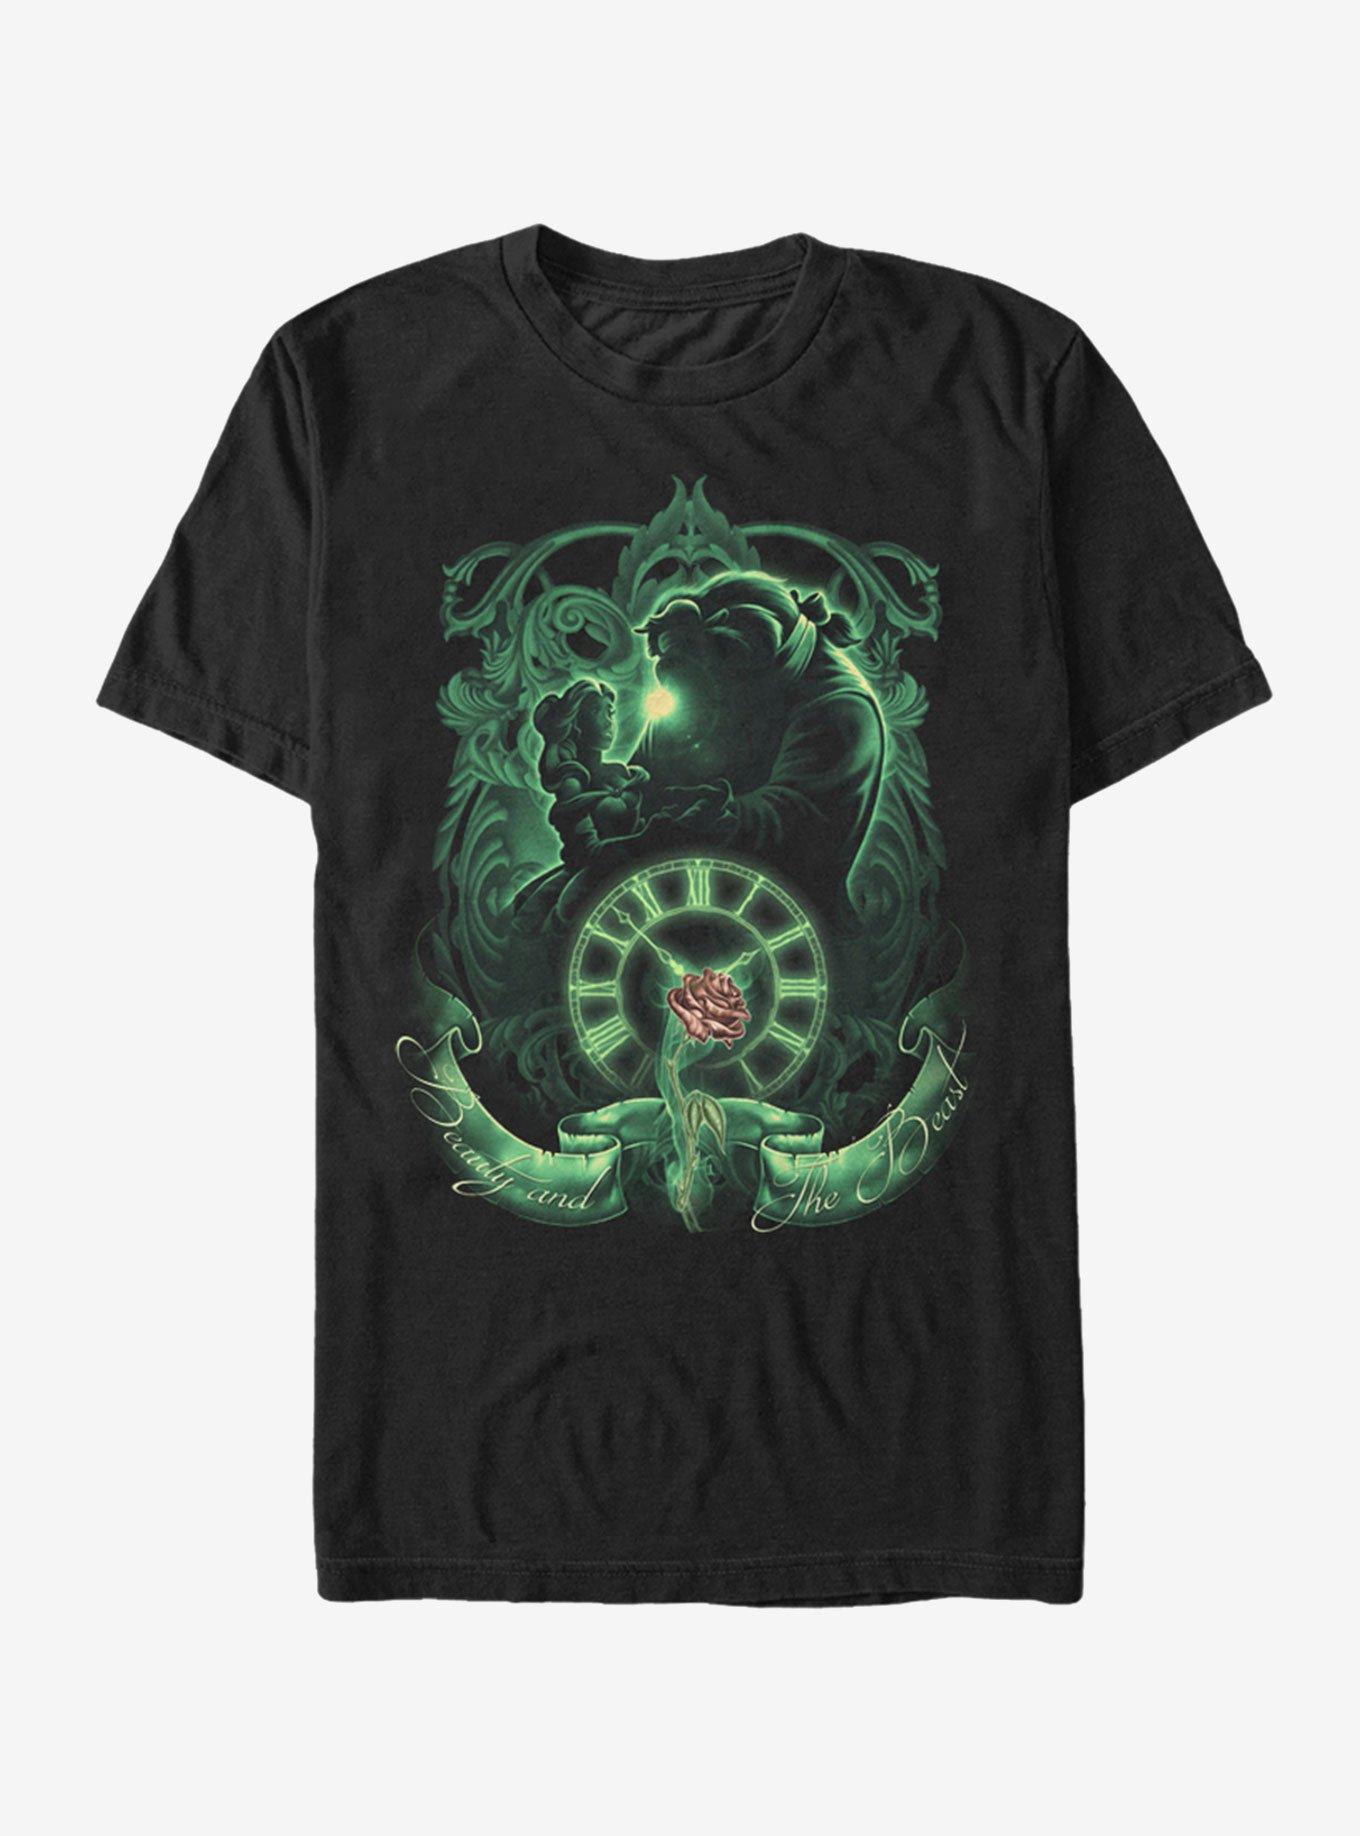 Disney Beauty and the Beast Time T-Shirt, BLACK, hi-res